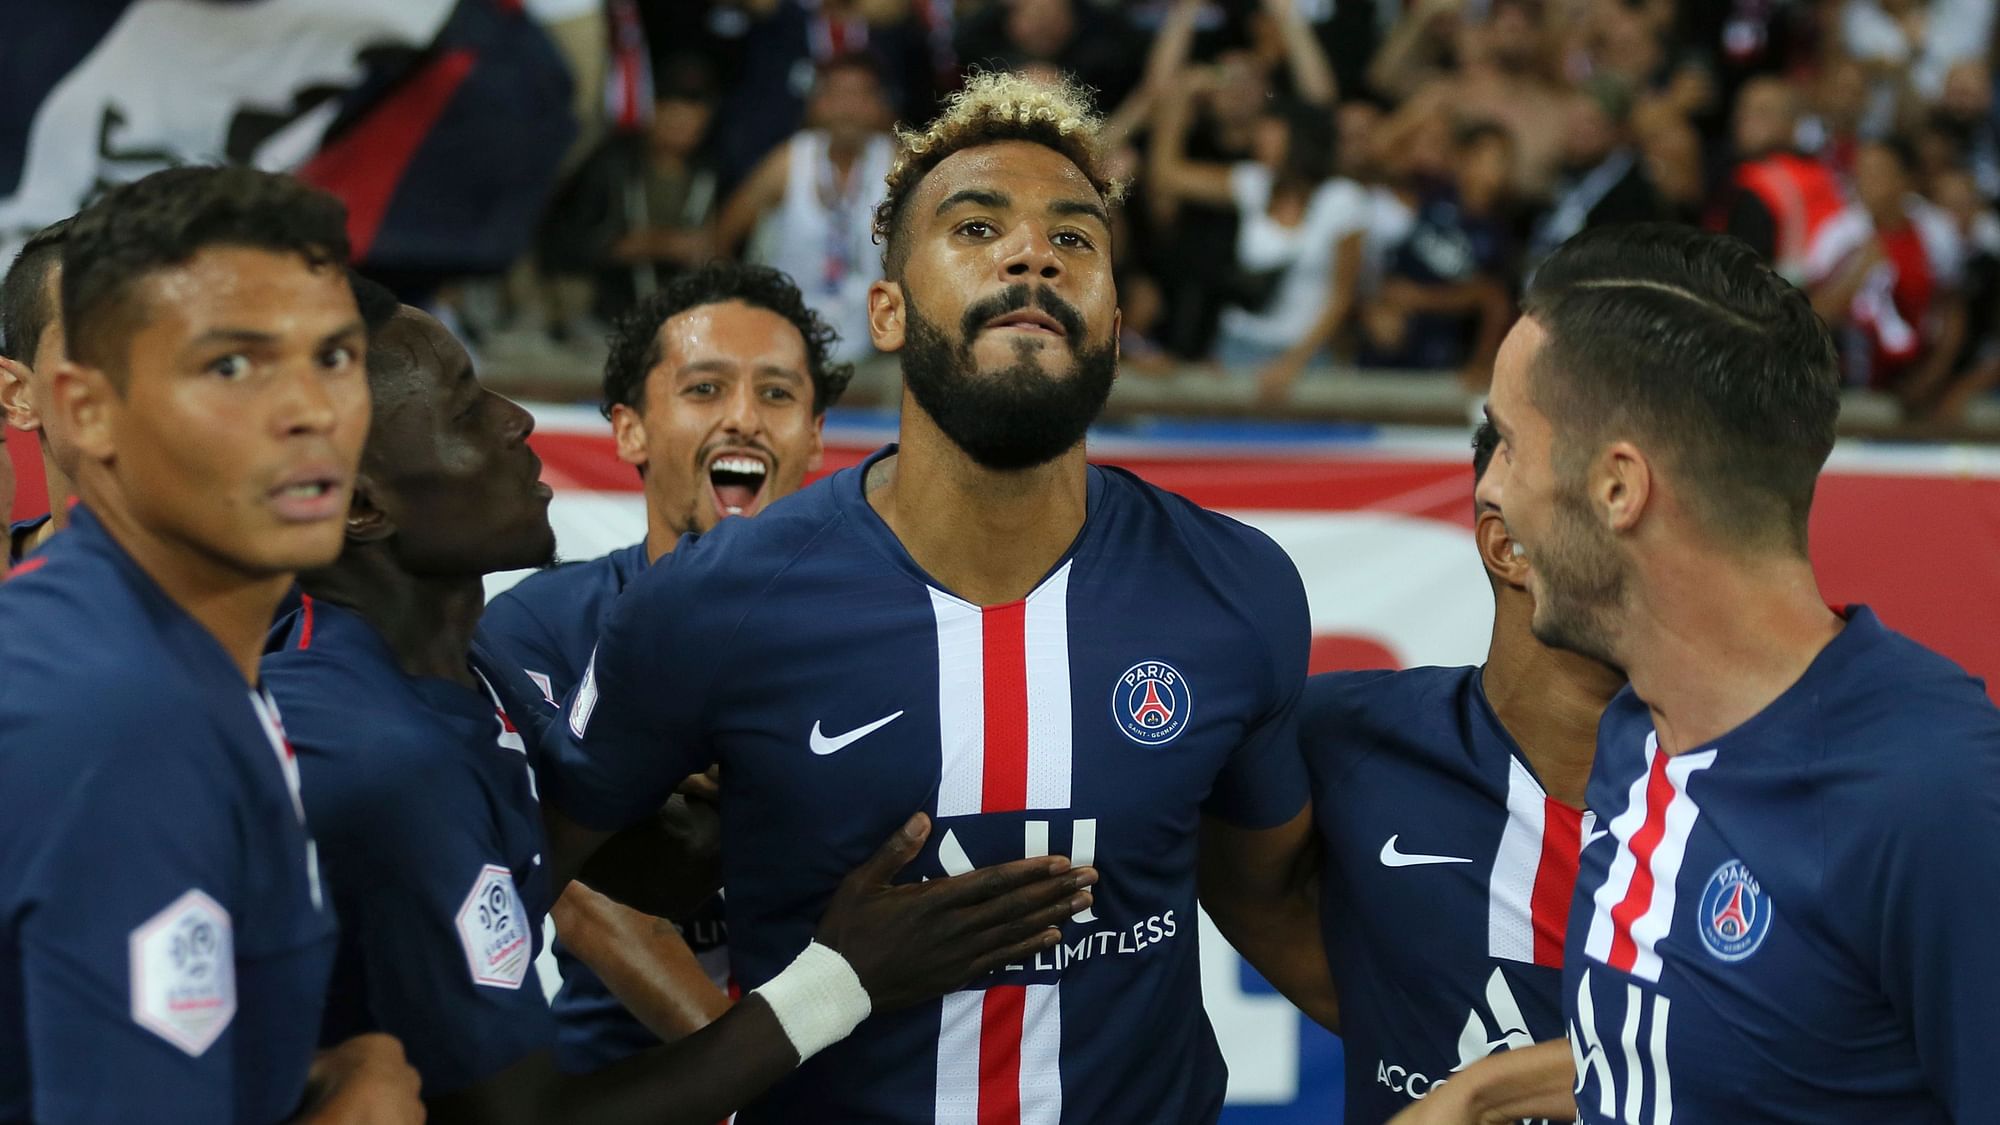 Striker Eric-Maxim Choupo-Moting distinguished himself with a fine goal and scored a second as Paris Saint-Germain beat Toulouse 4-0.